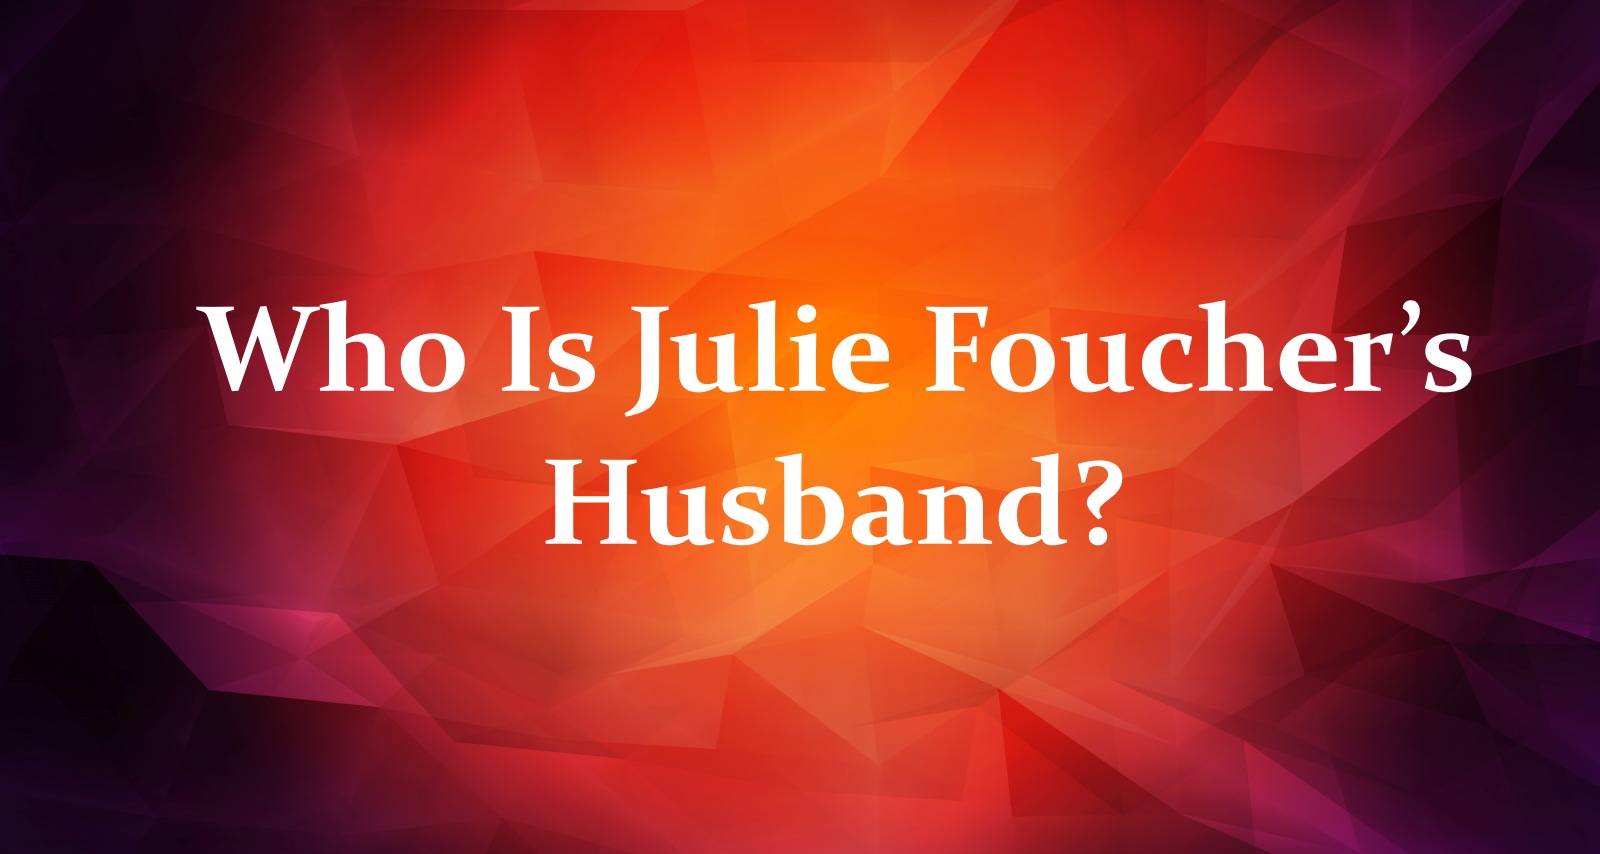 Who Is Julie Foucher’s Husband